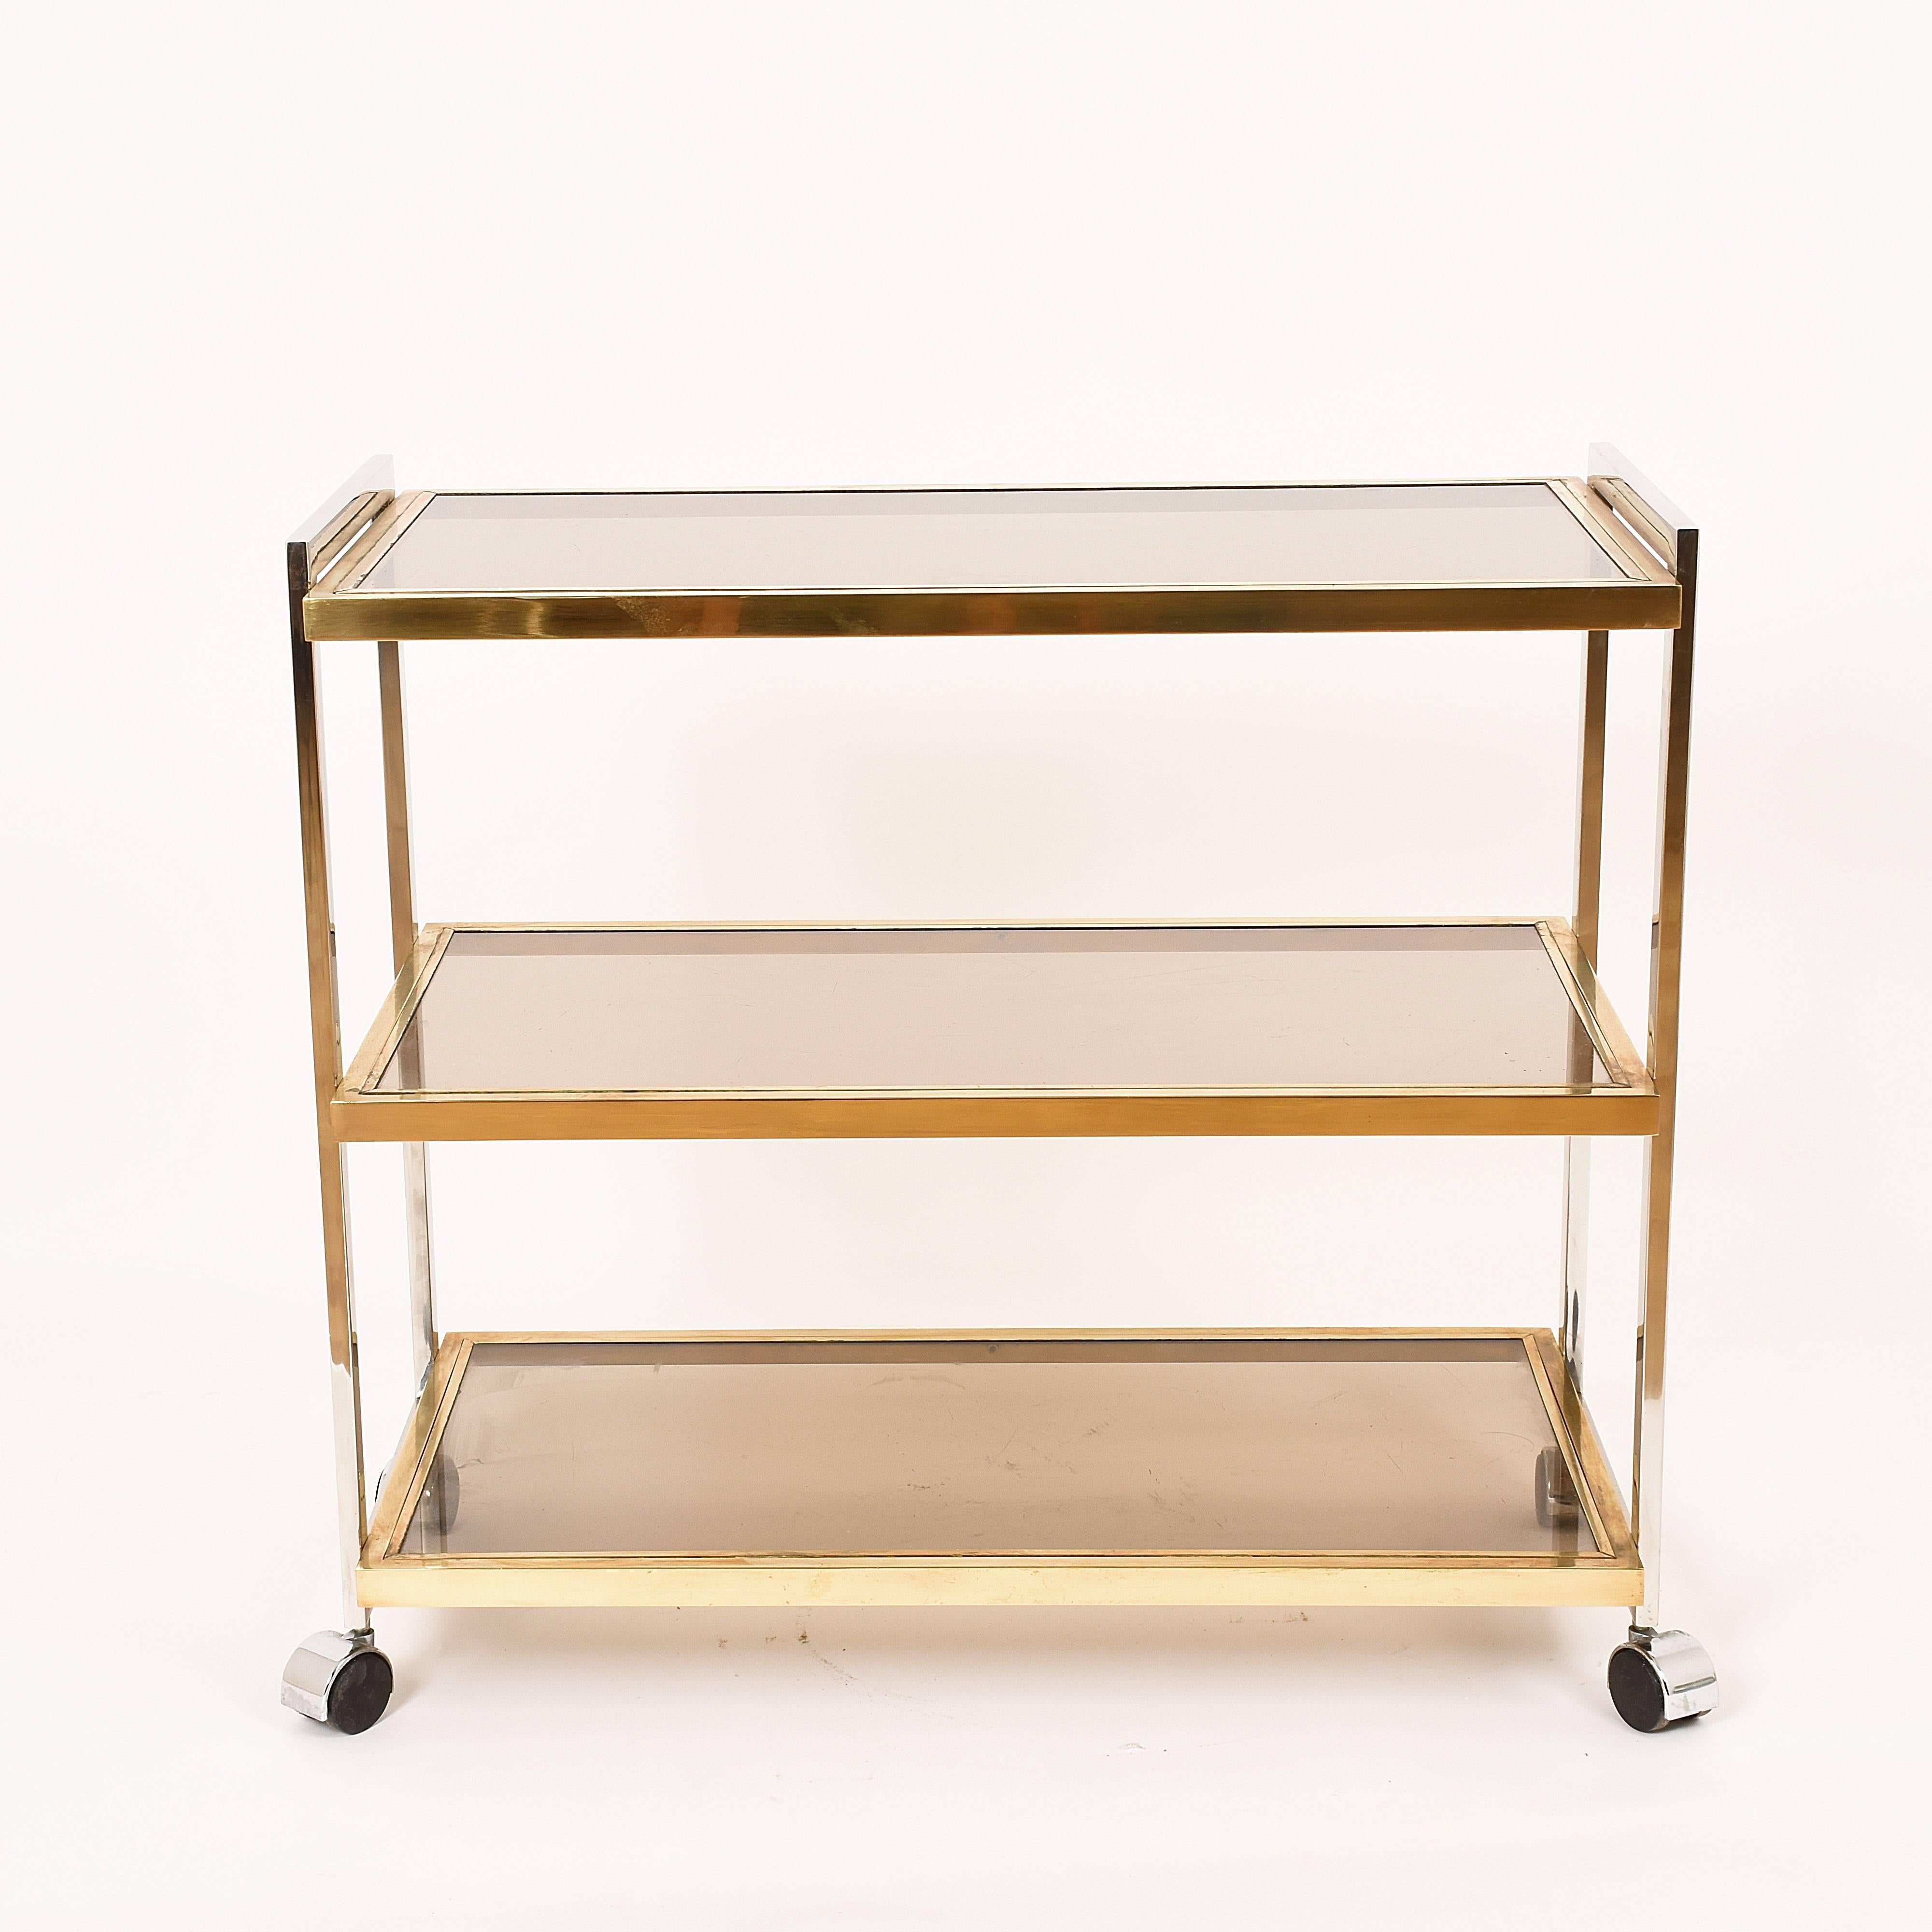 Beautiful trolley bar cart with a straight-lined design. This amazing end table was produced in Italy during the 1970s and it is attributed to Romeo Rega.

This cart is made of three smoked glass shelves on chromed and brass structure, laying on